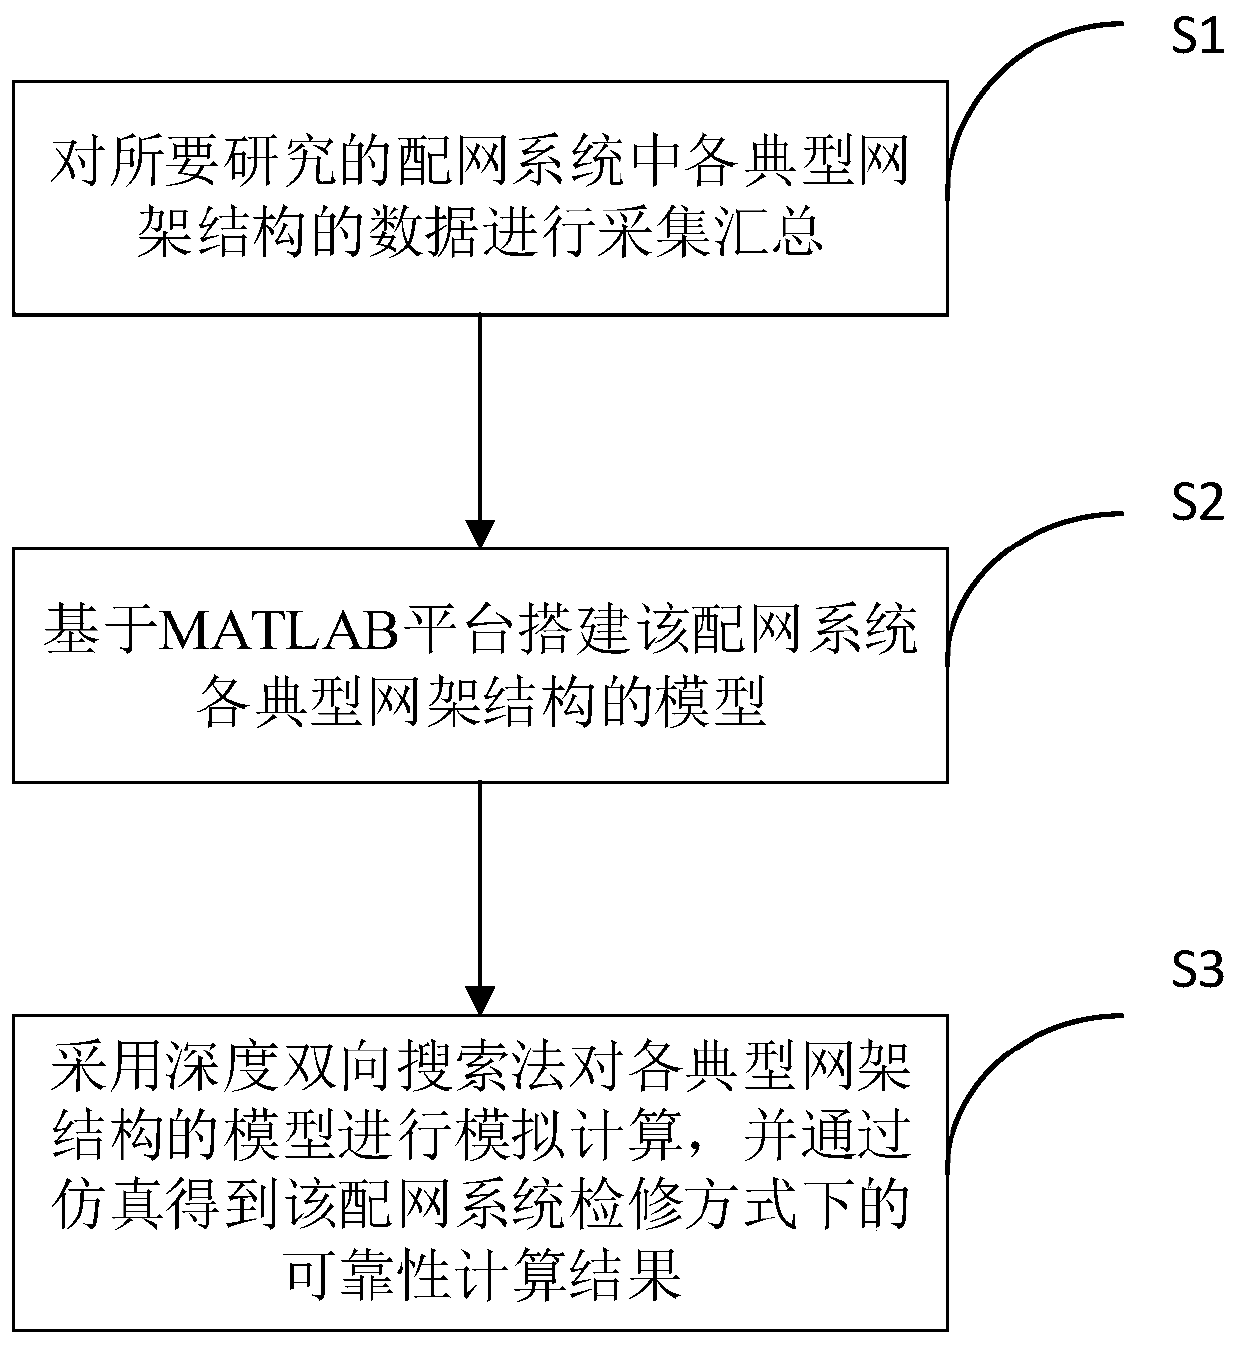 Reliability evaluation method for distribution network under maintenance mode based on deep bidirectional search method